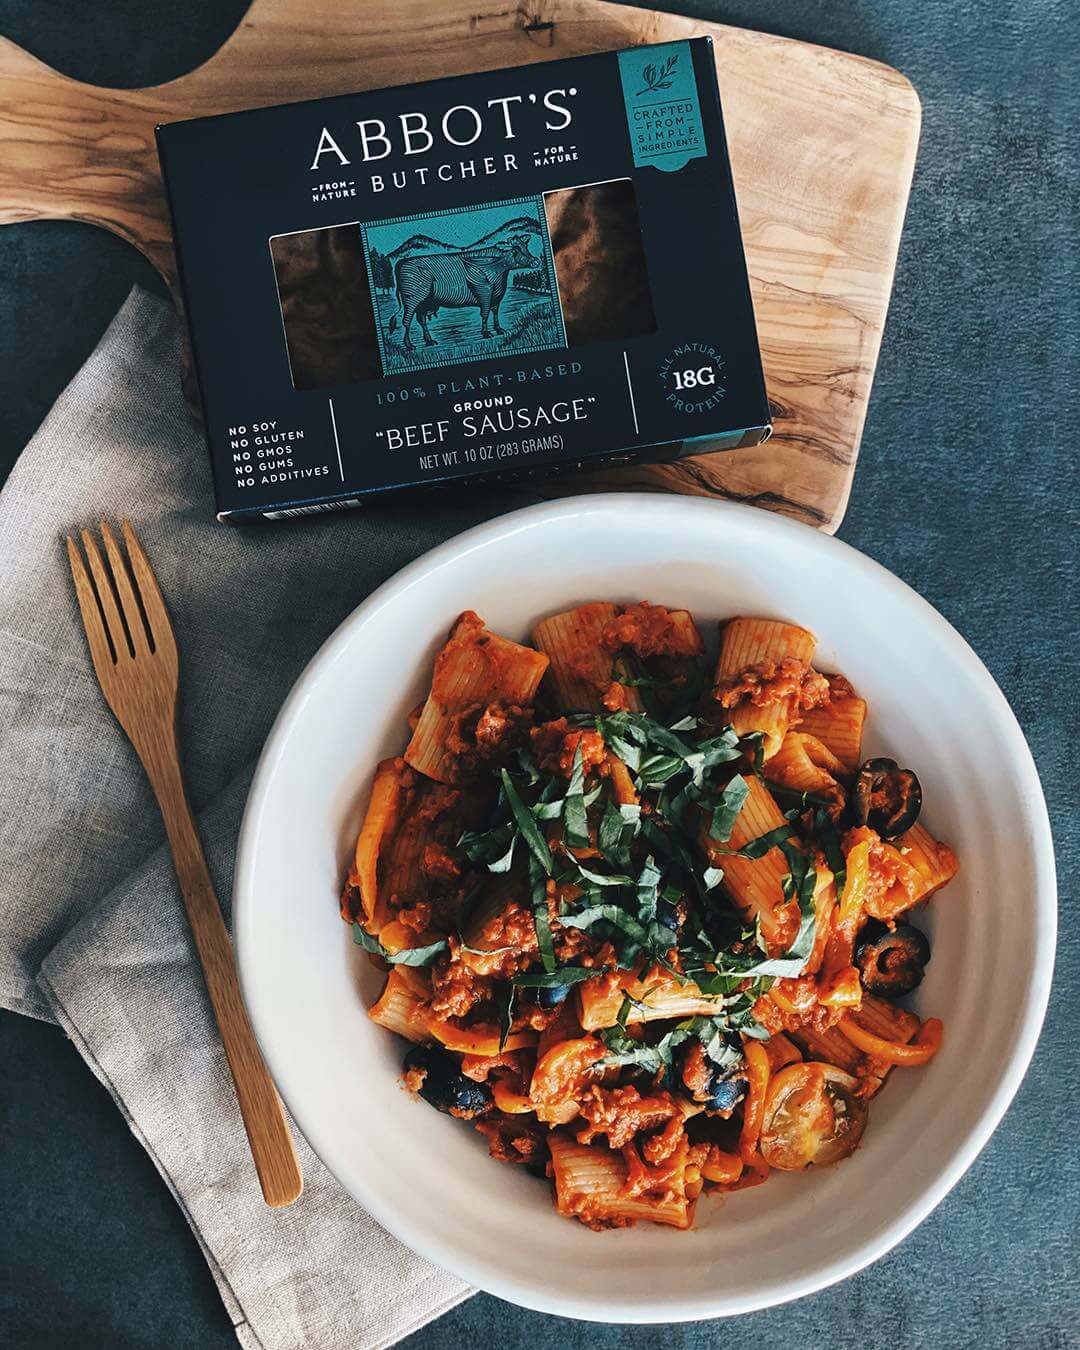 Pasta made with Abbot's plant based sausage